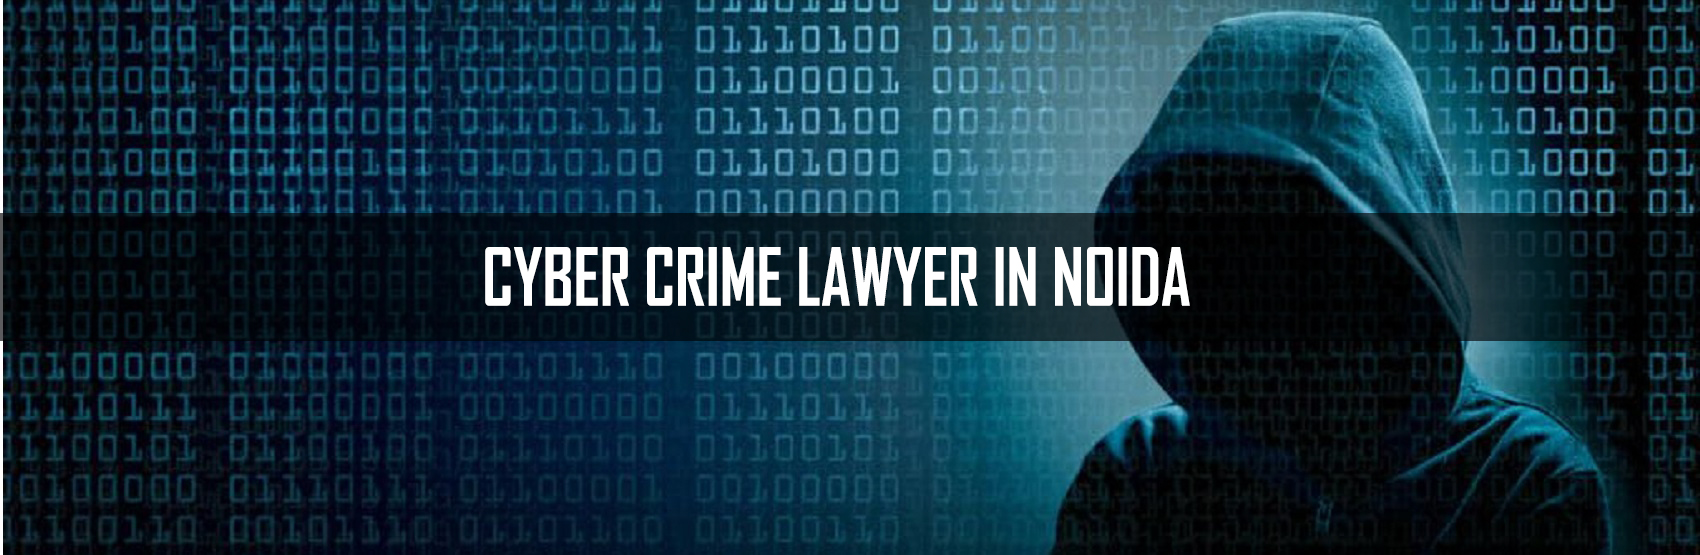 Cyber Crime Lawyer in Noida